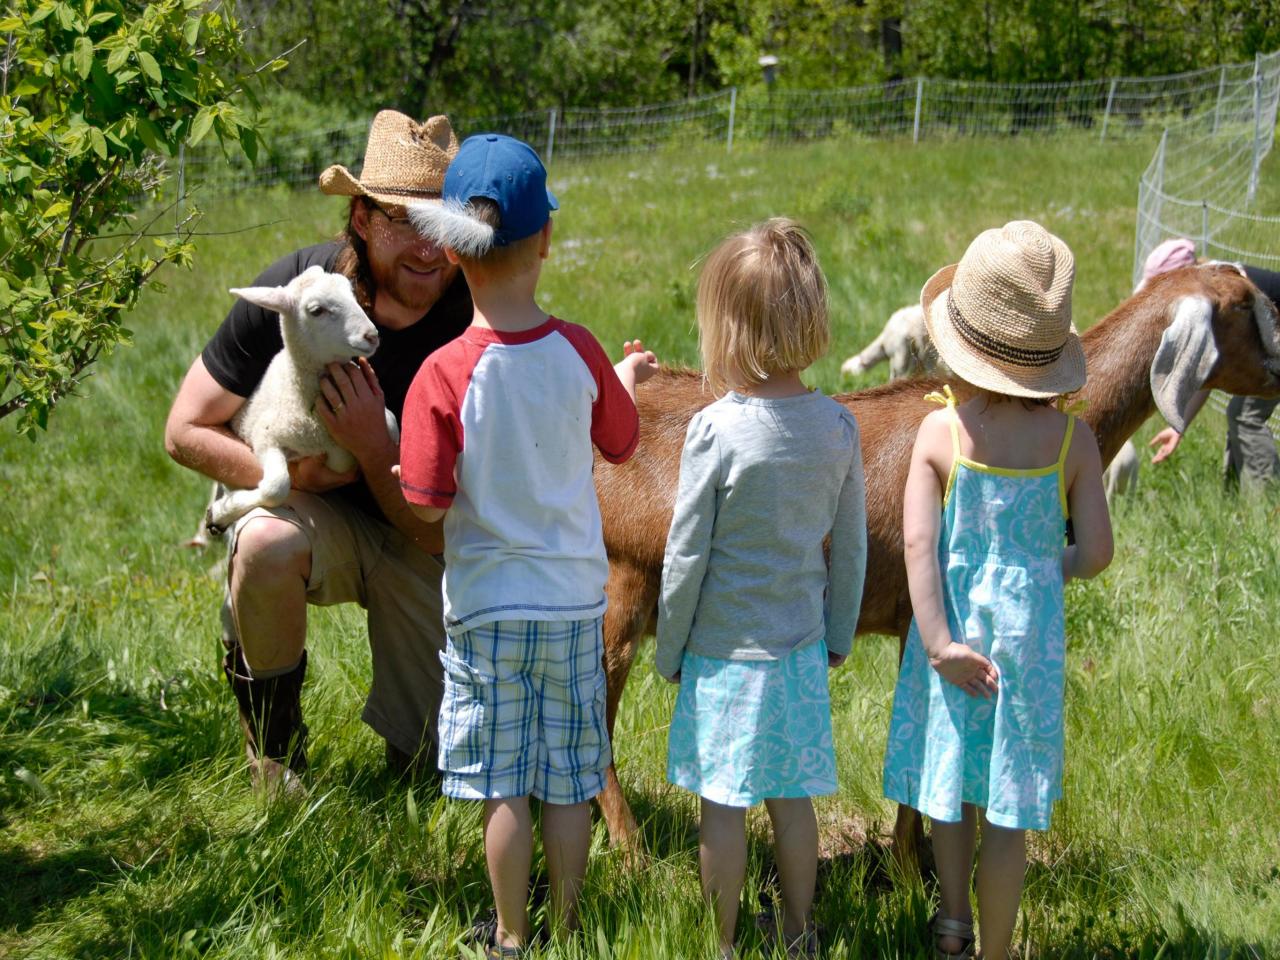 6 Places to Take the Kids for a Farm Stay | Travel Channel